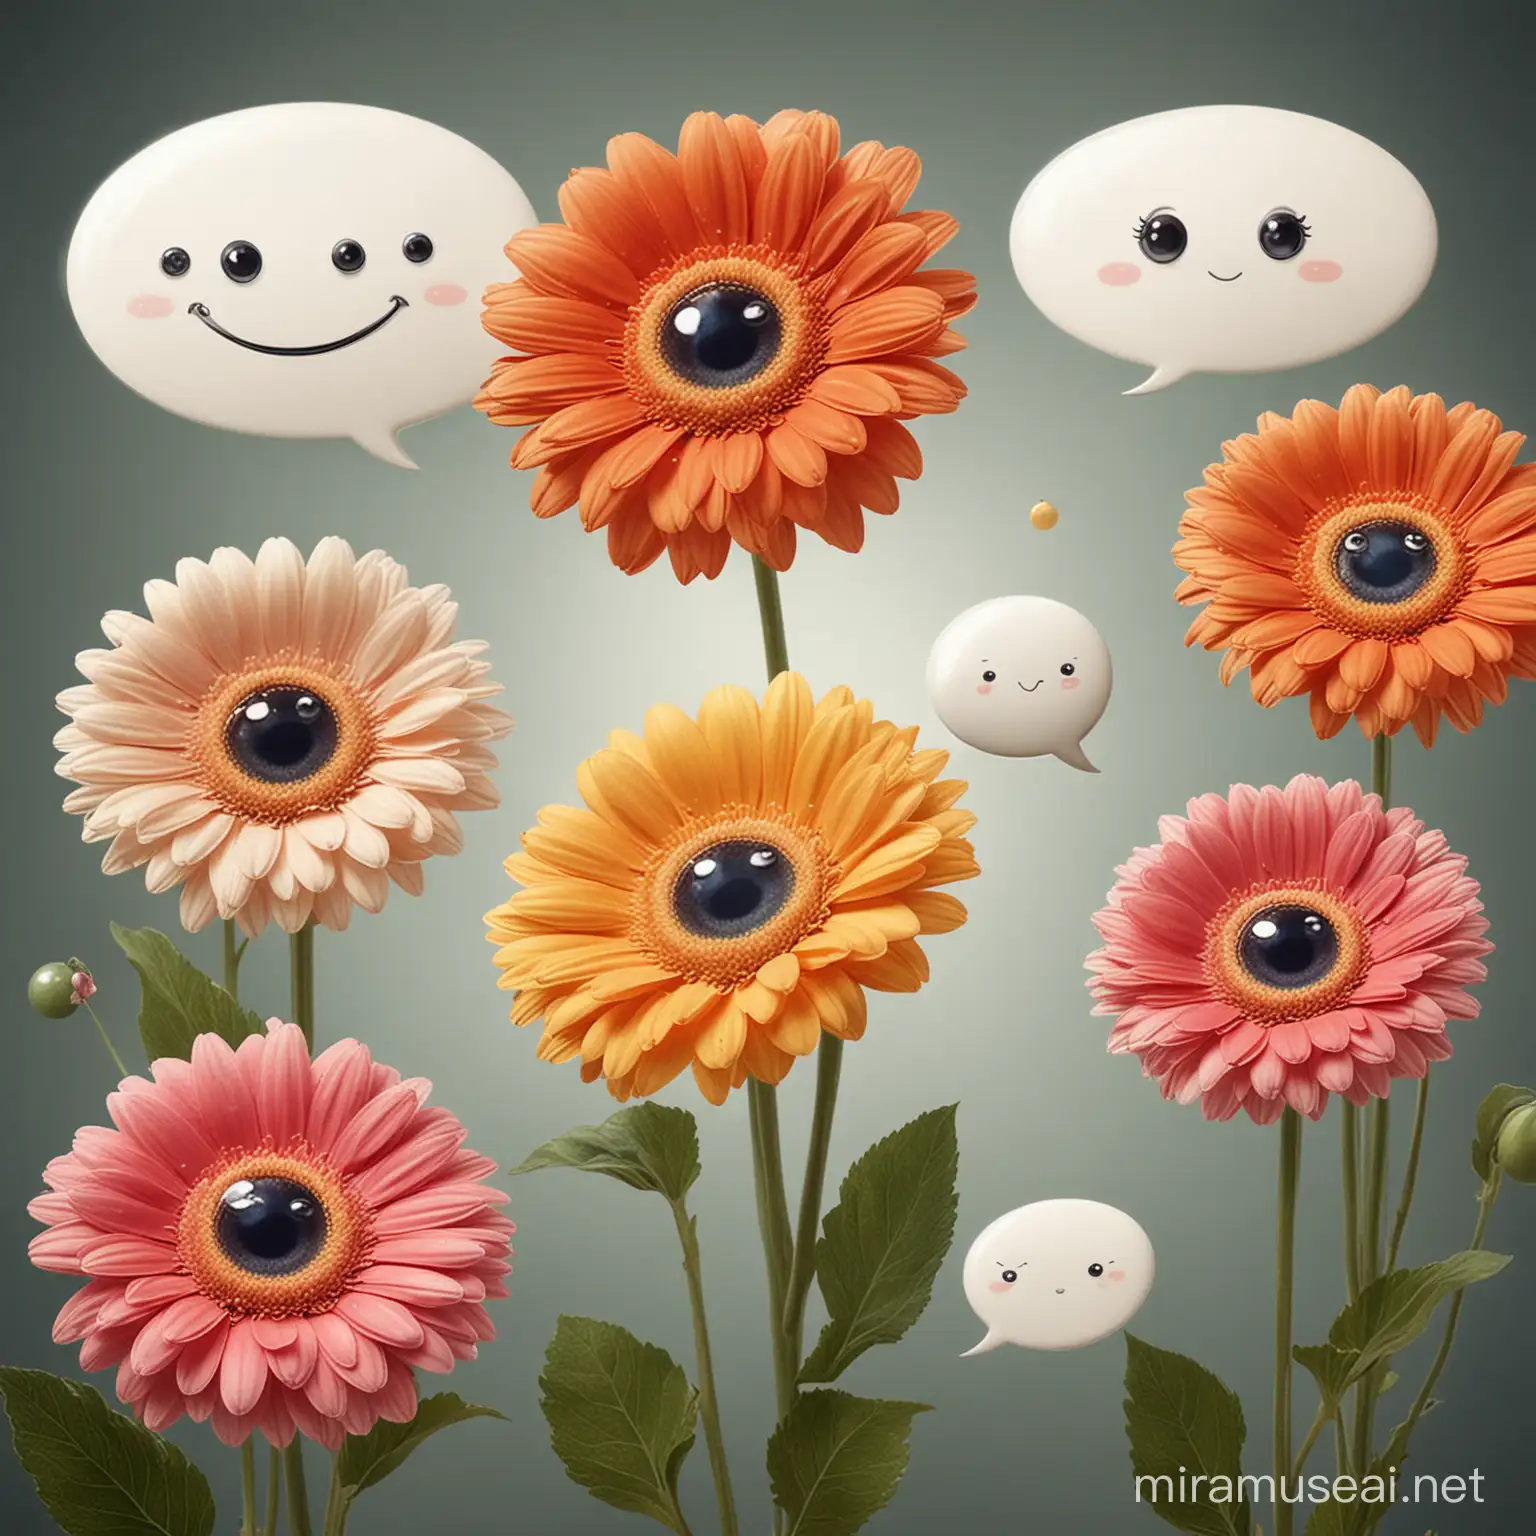 Enchanting Gerberas with Fairy Tale Characters and Speech Bubbles